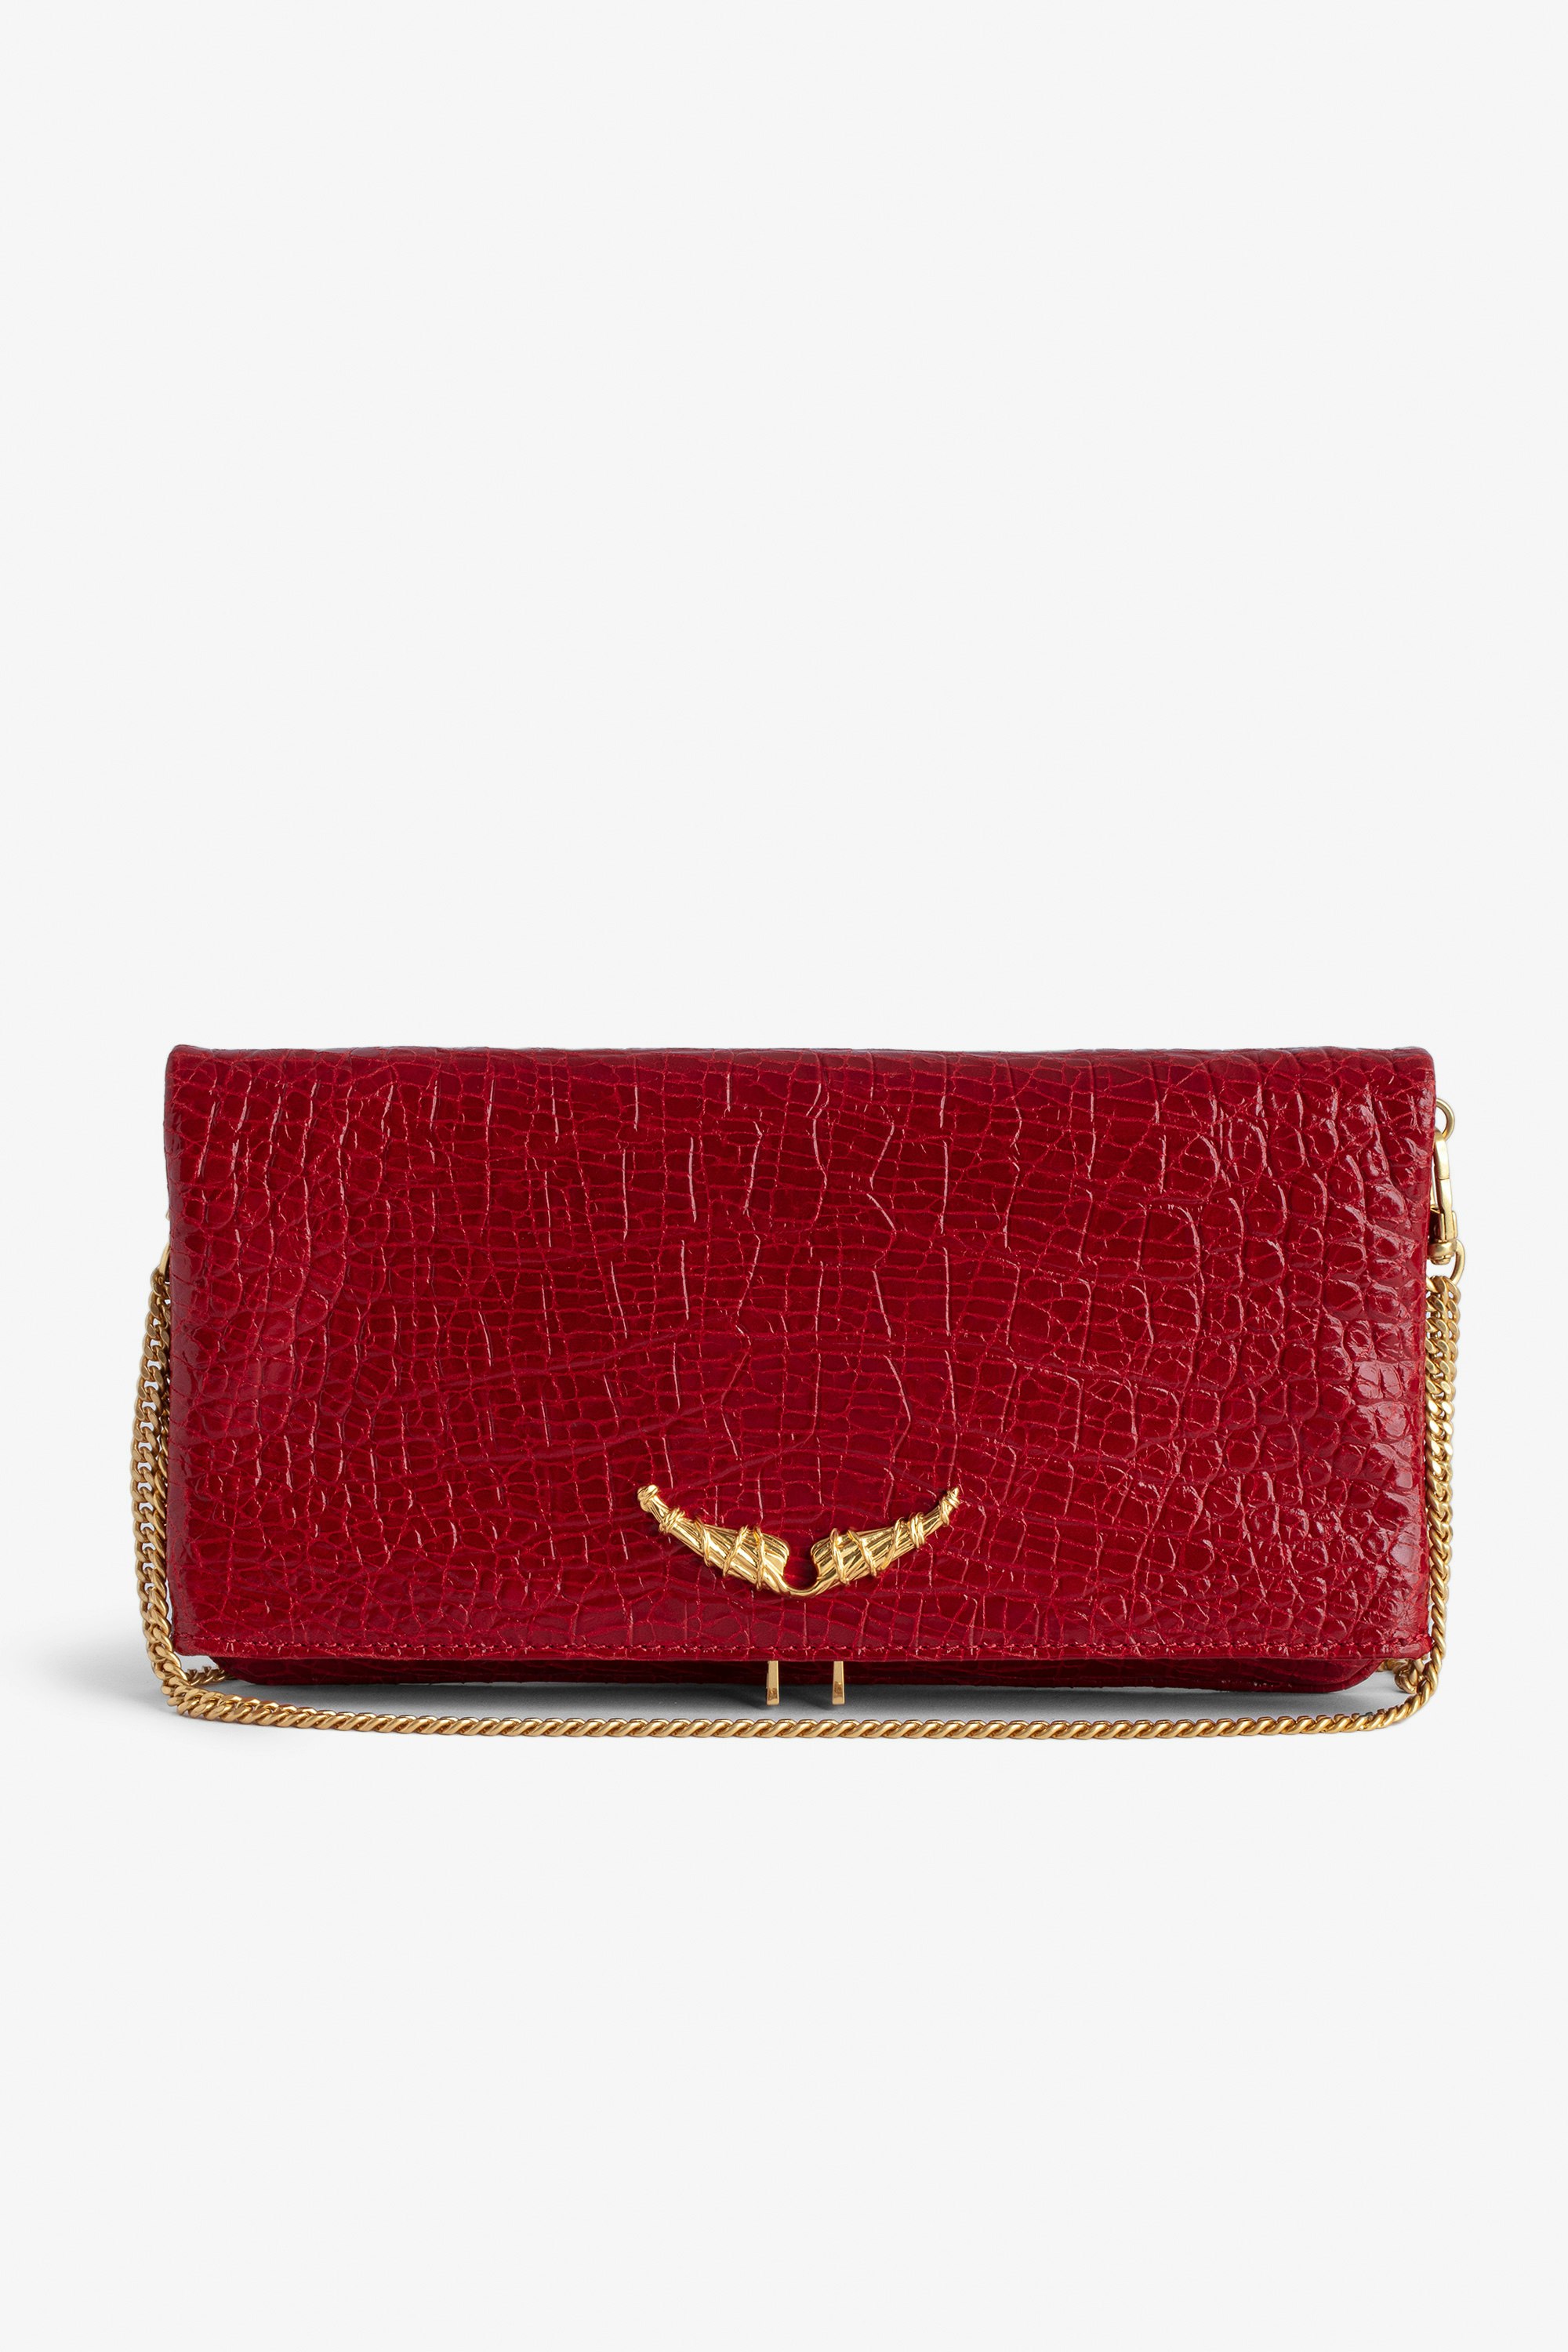 Rock Embossed Clutch - Rock red croc-embossed leather clutch with gold-tone metal chain.